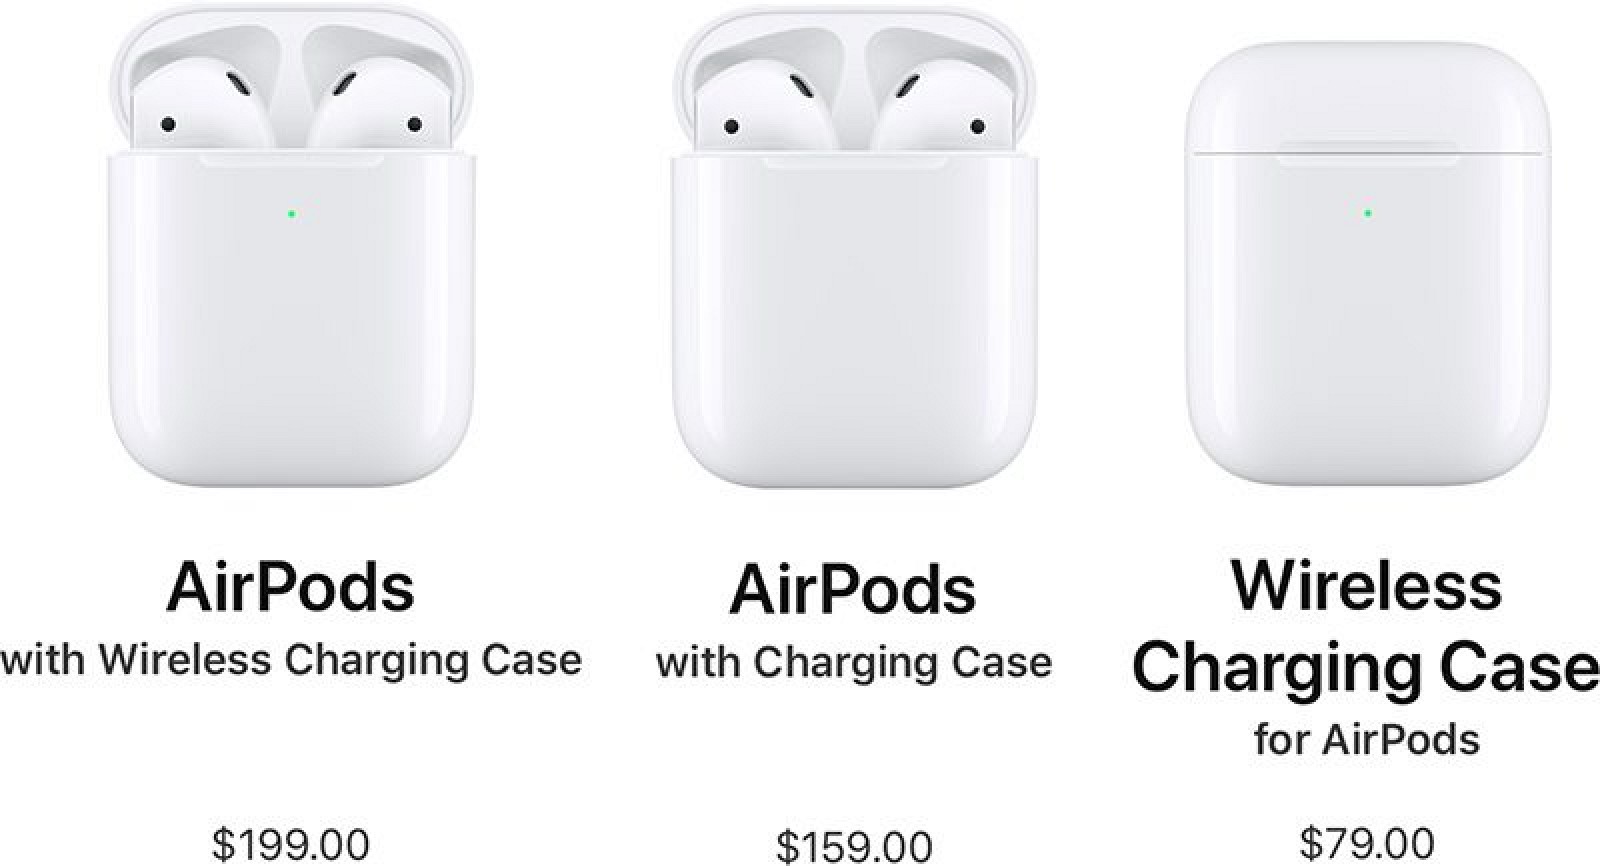 Когда вышел airpods 3. Apple AIRPODS Pro 2nd Generation. Apple Charging Case для AIRPODS 3. Сравнить AIRPODS 2 Pro Generation with Wireless и AIRPODS 2 Pro Generation. AIRPODS 2 with Wireless Charging.